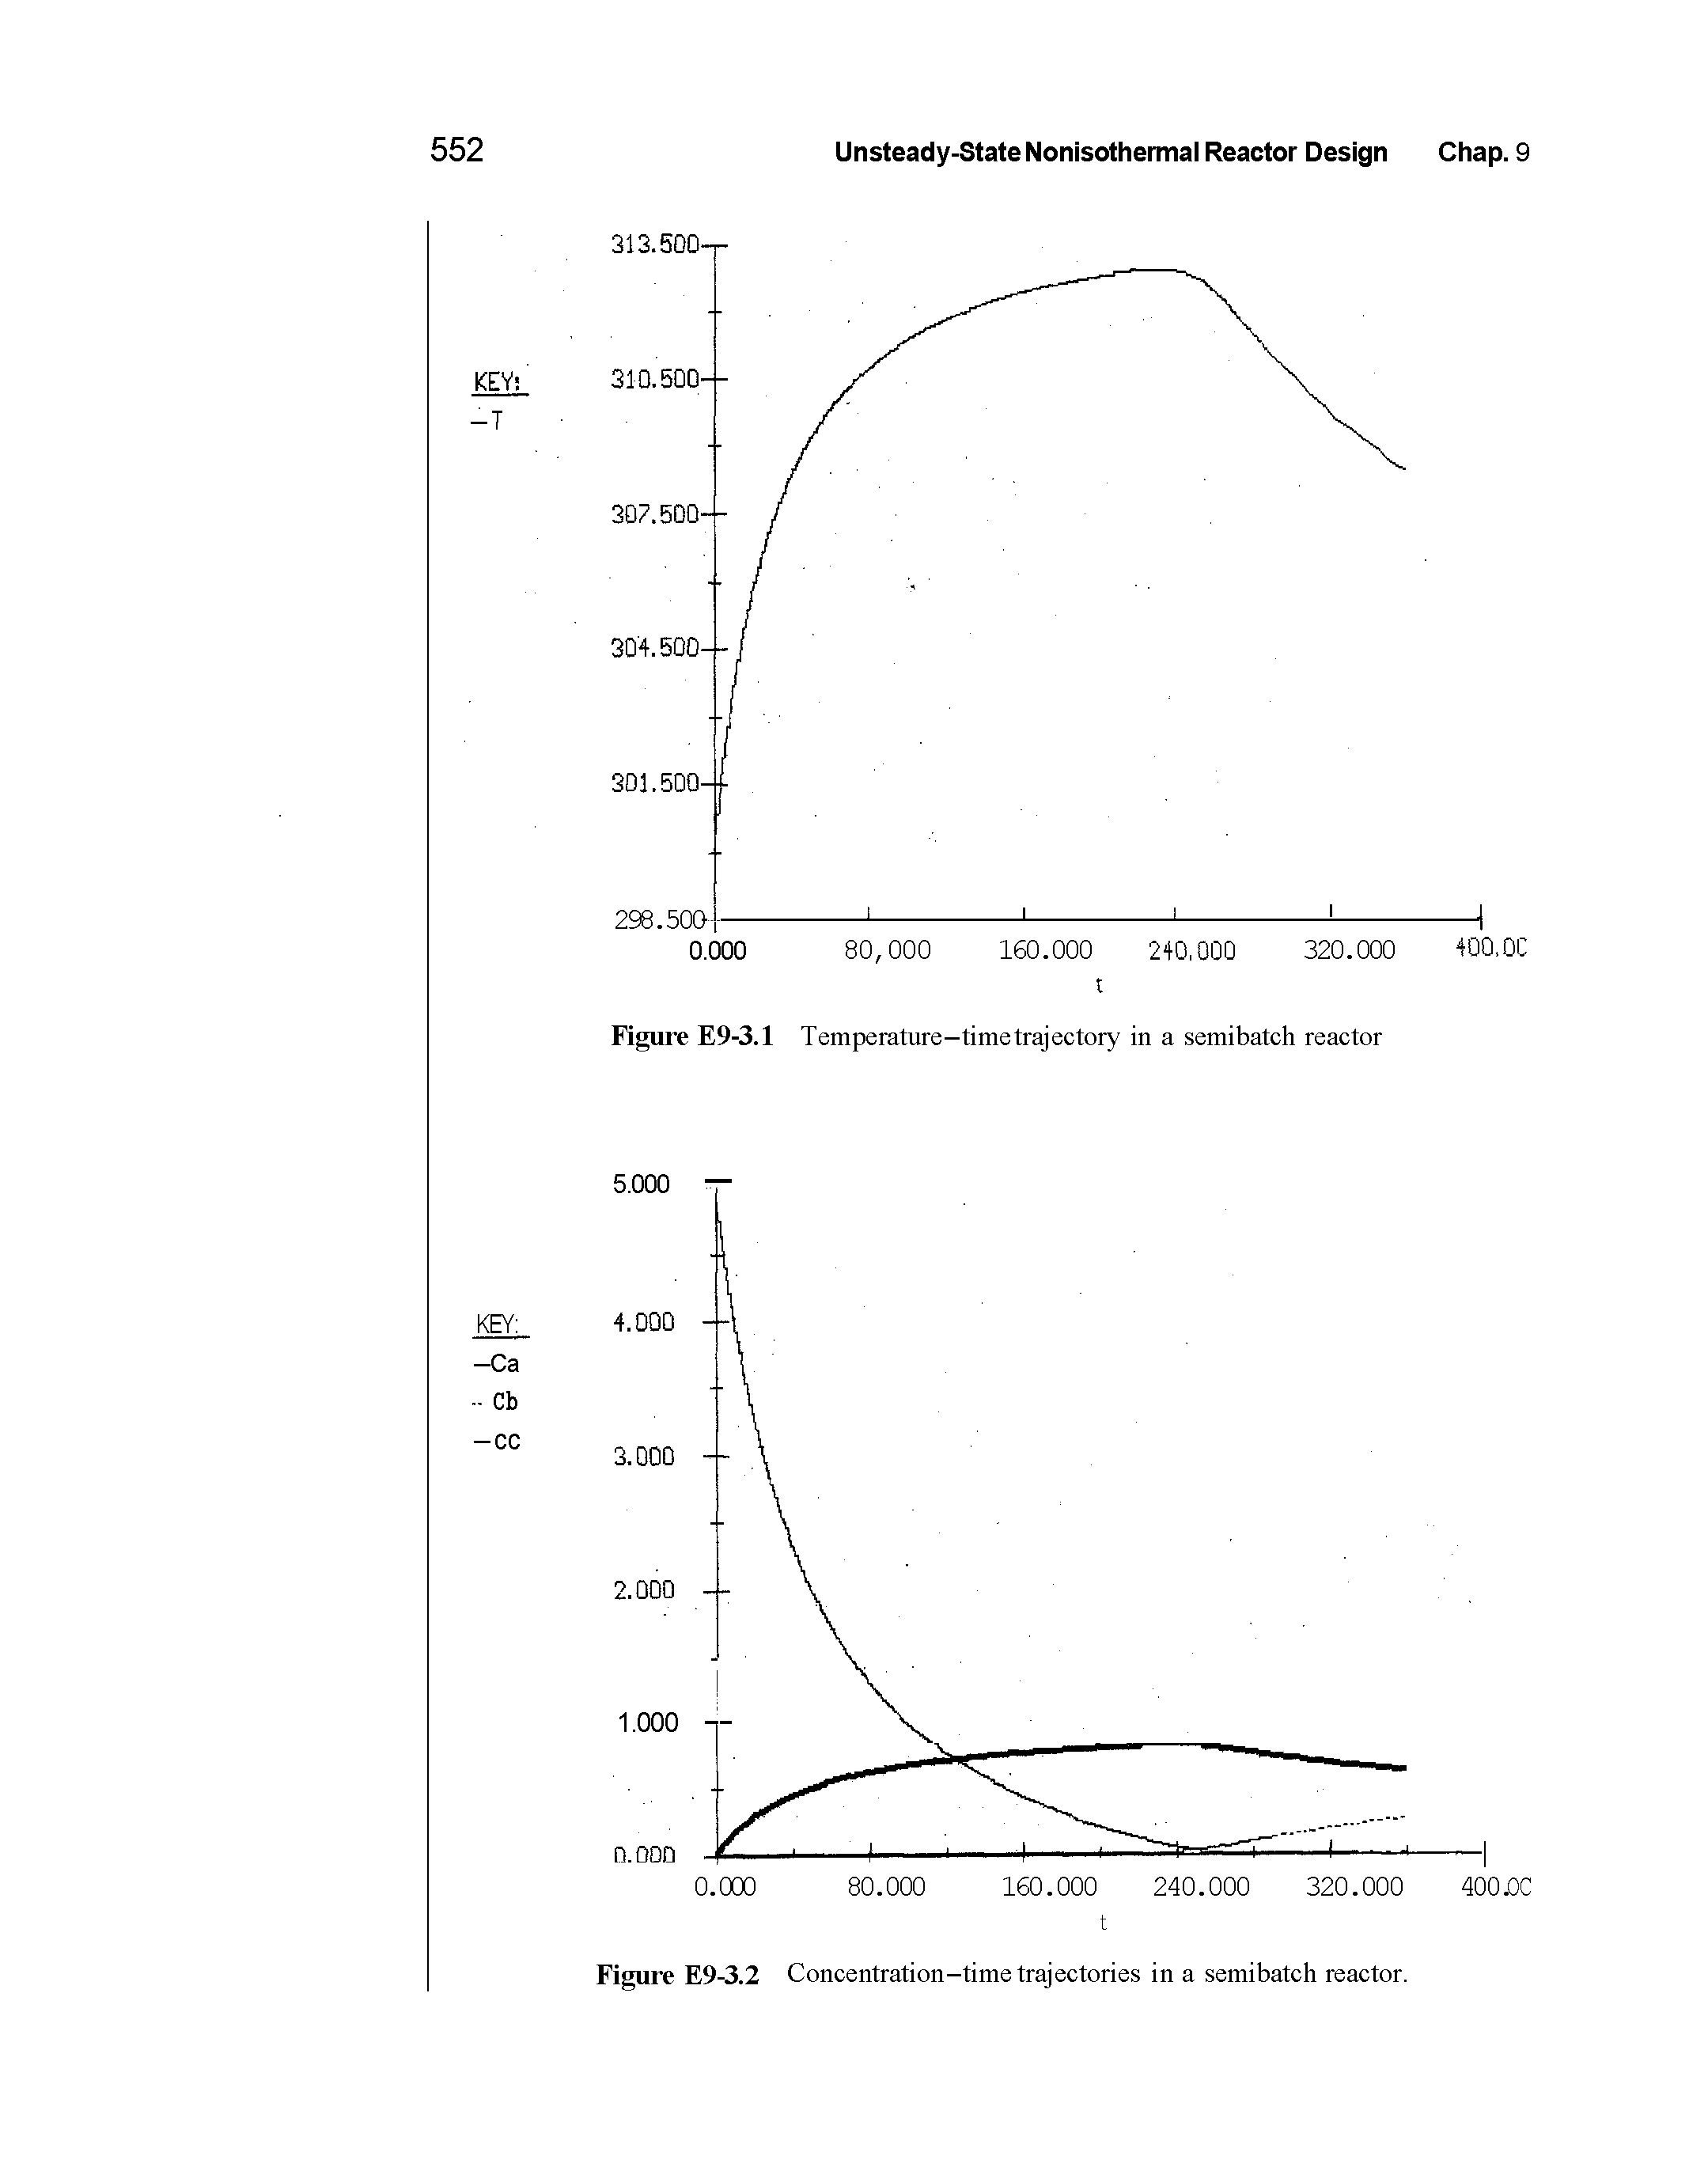 Figure E9-3.2 Concentration-time trajectories in a semibatch reactor.